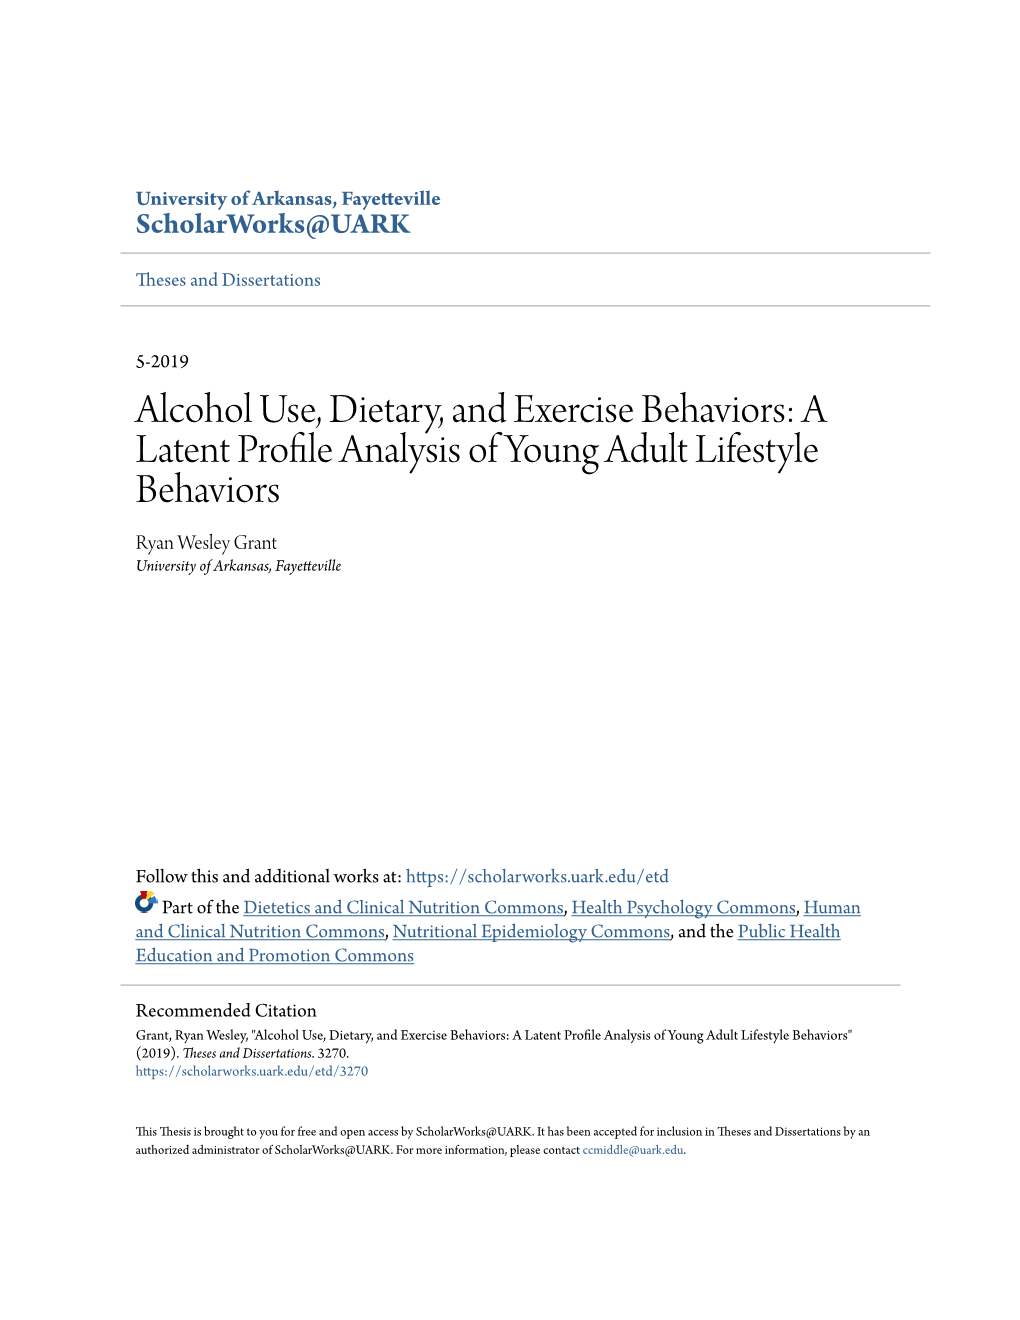 Alcohol Use, Dietary, and Exercise Behaviors: a Latent Profile Analysis of Young Adult Lifestyle Behaviors Ryan Wesley Grant University of Arkansas, Fayetteville